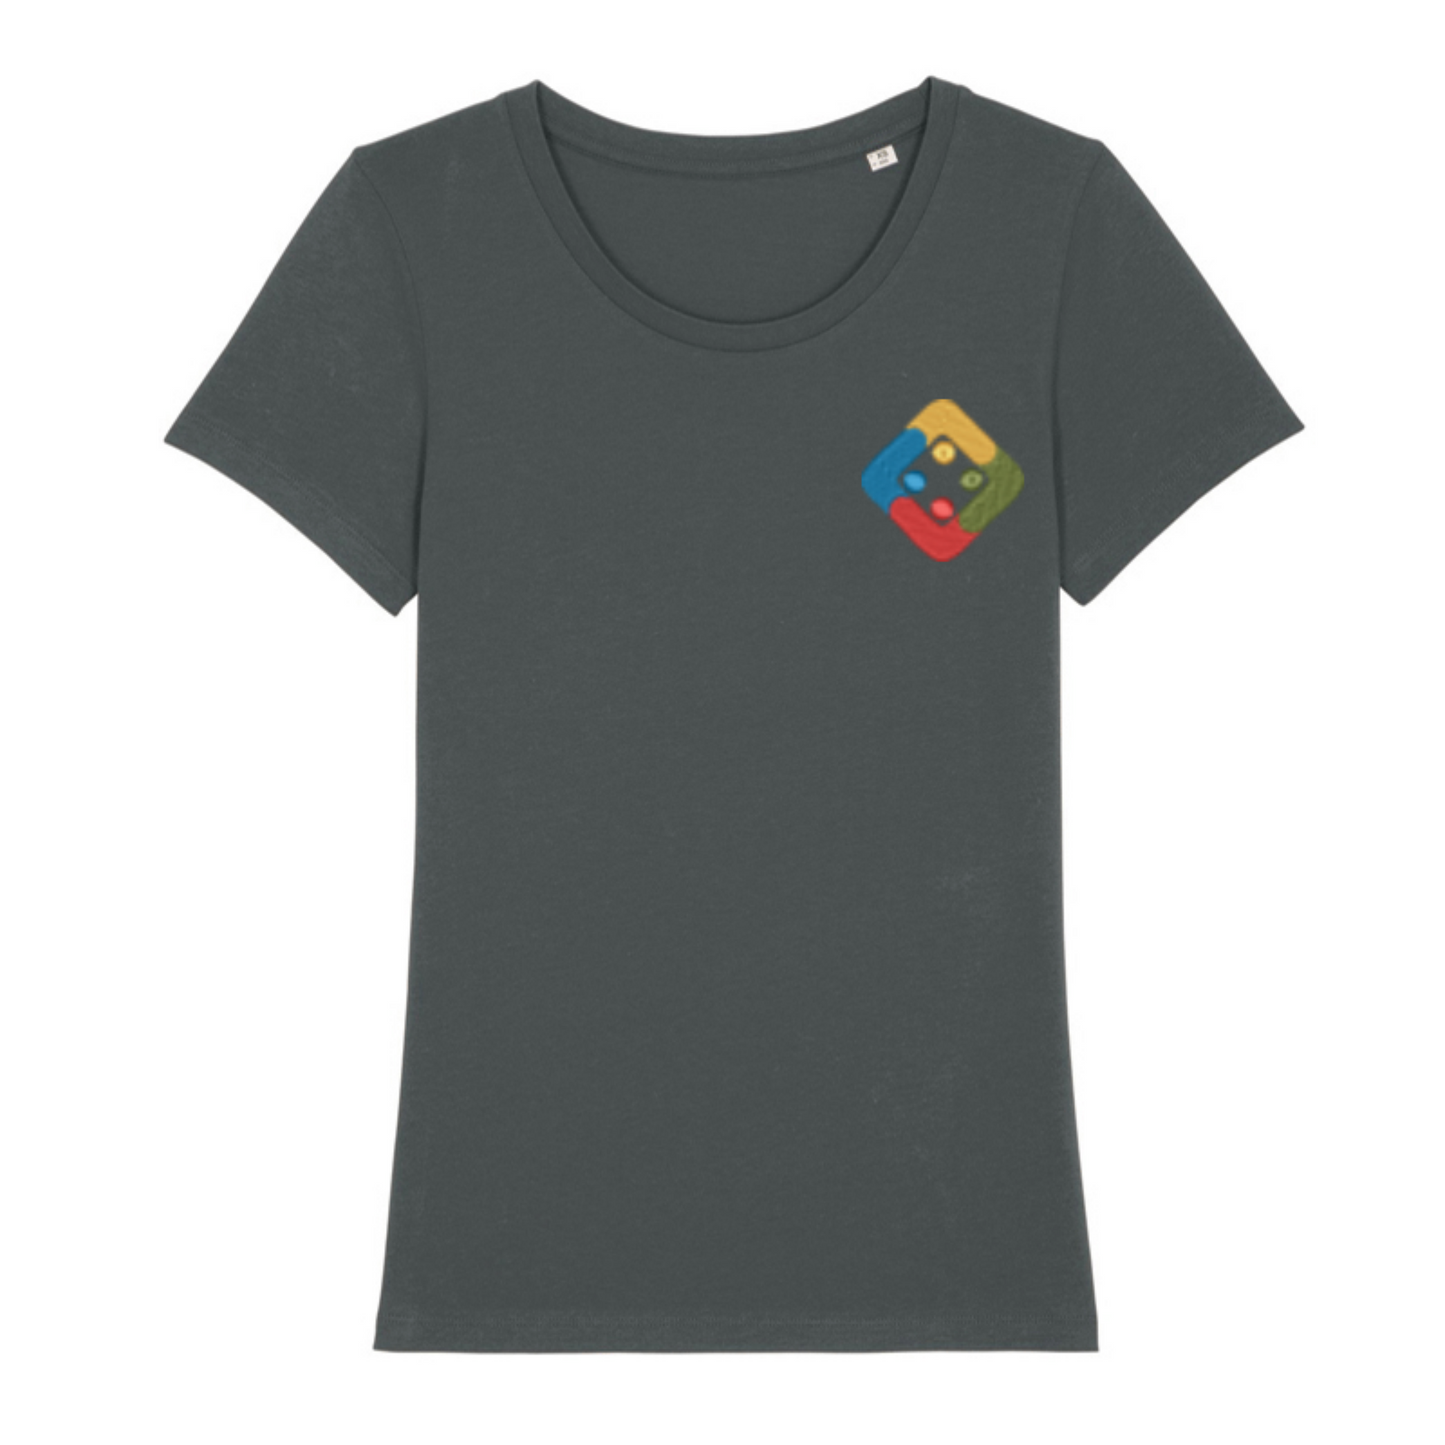 Women's organic Expresser Iconic T-shirt in dark colours with embroidered Uckers emblem.  Available in 15 colours.